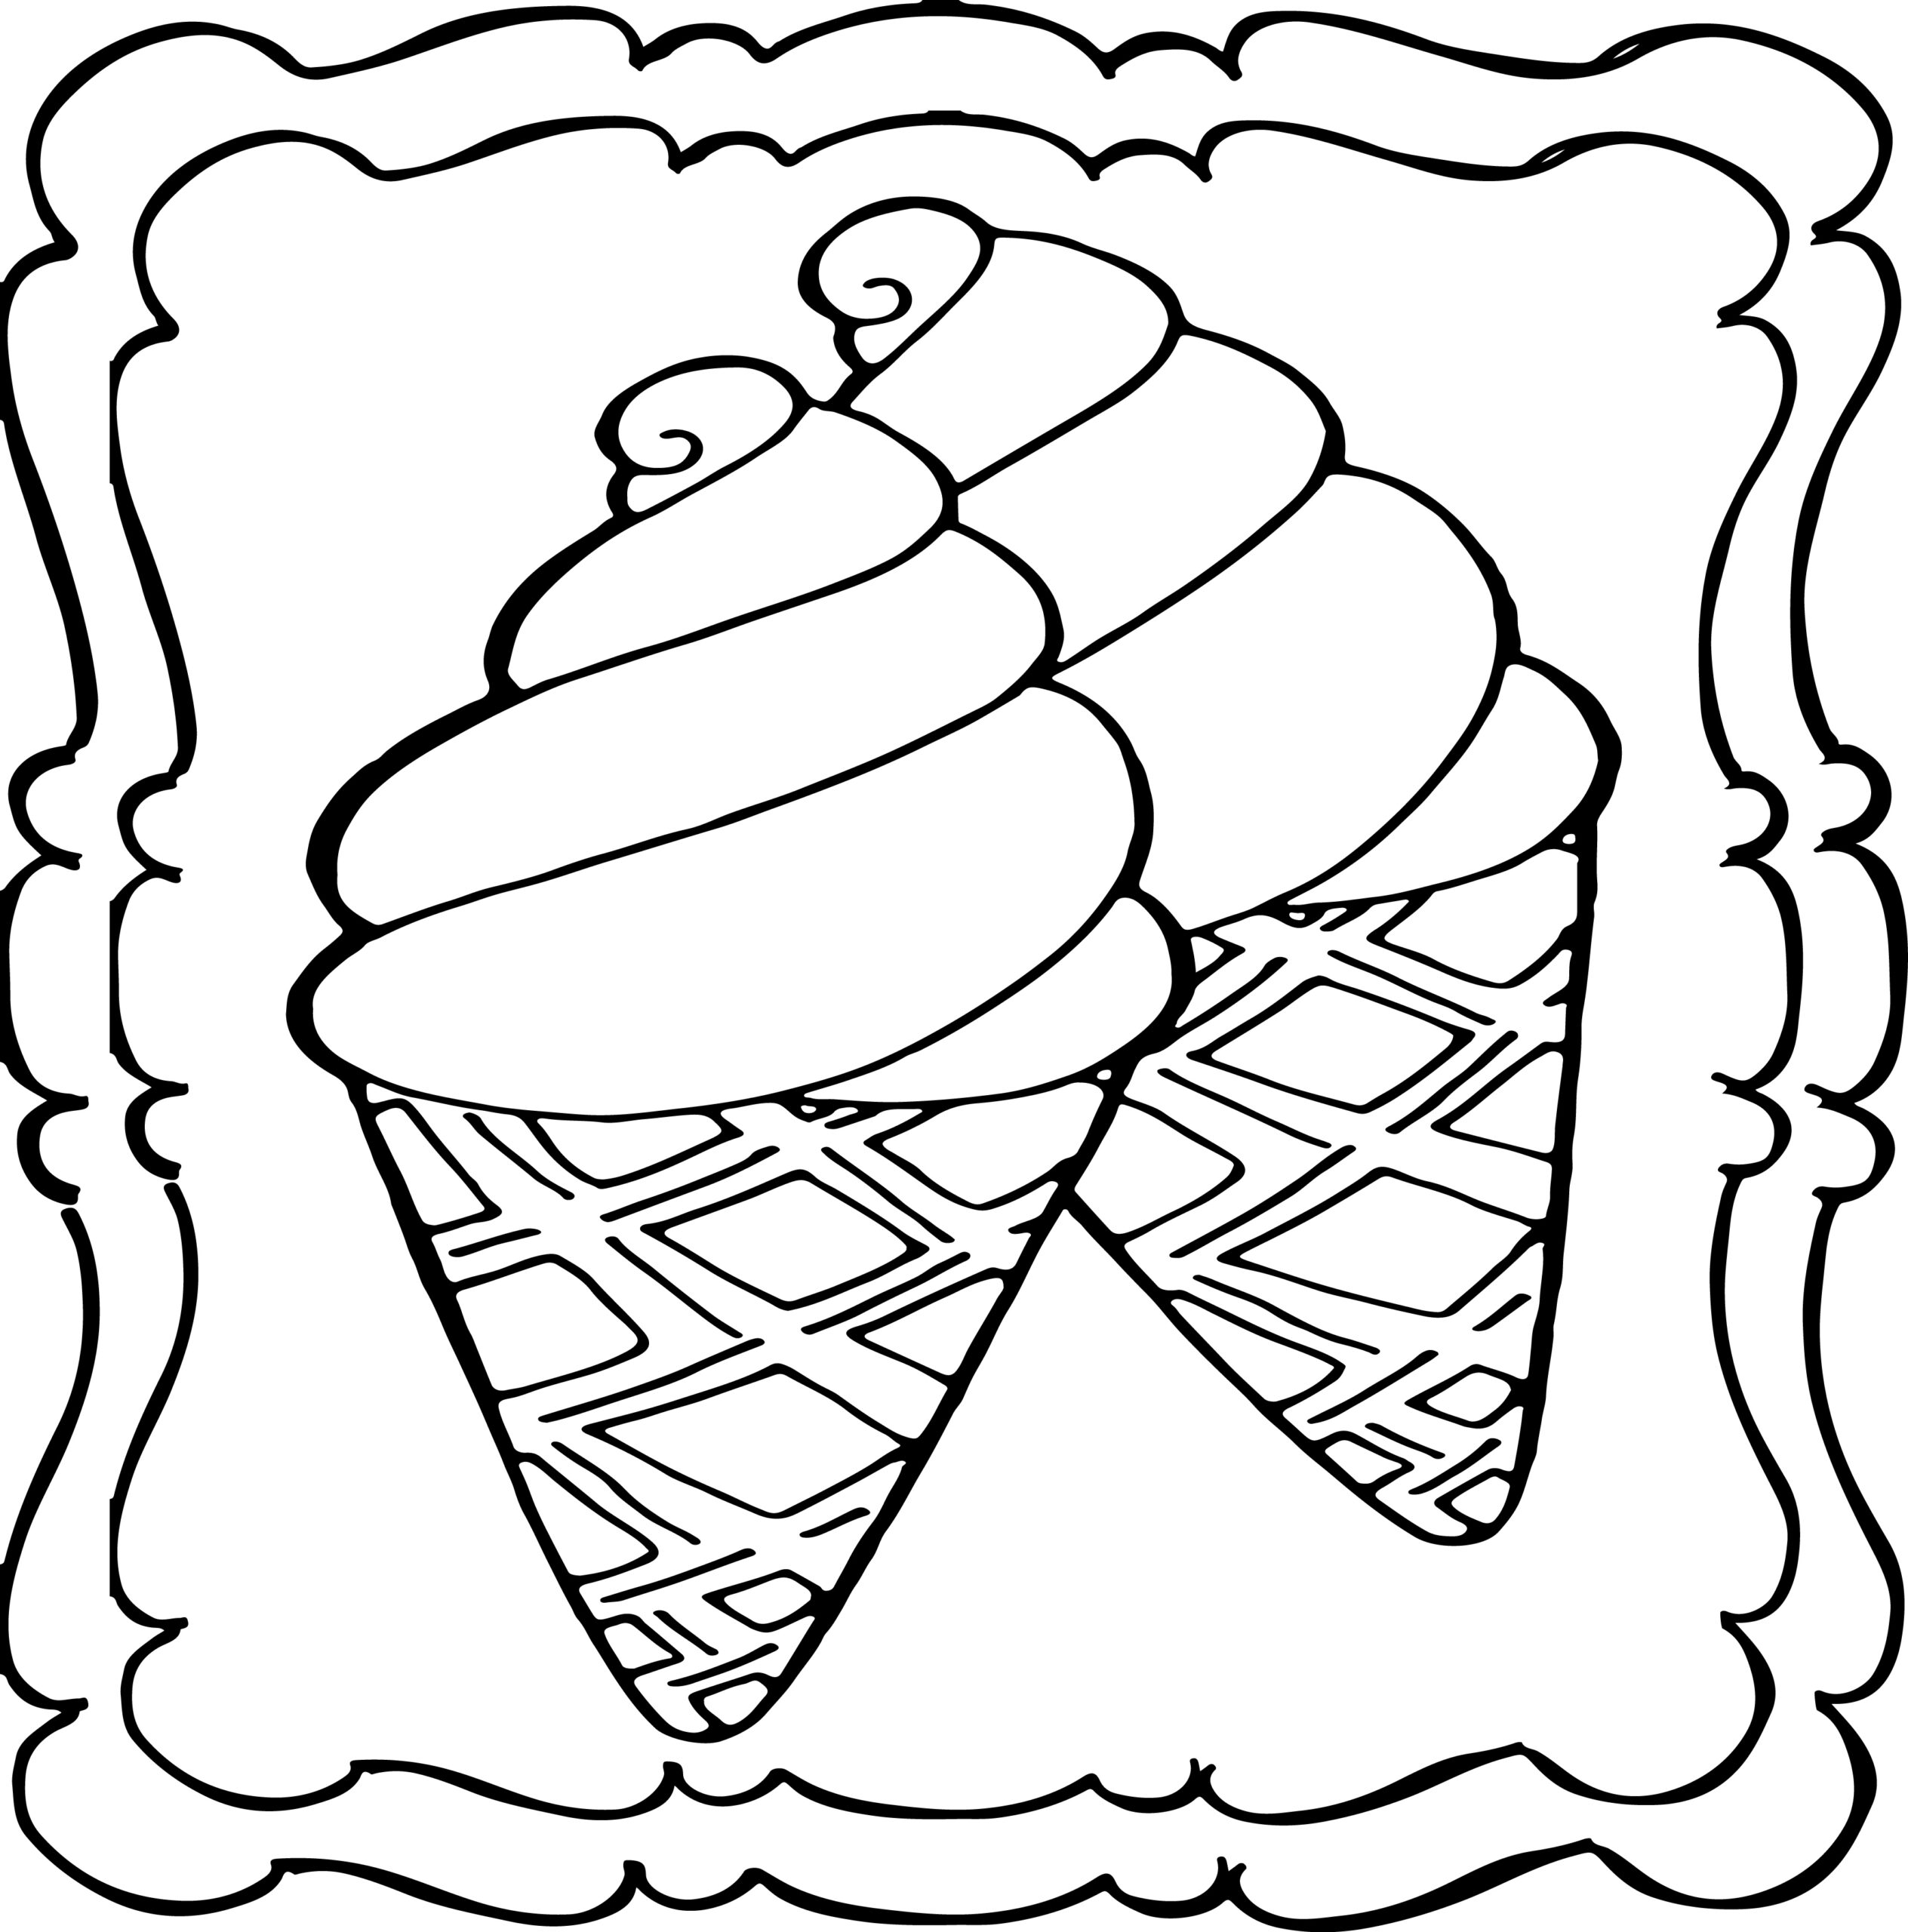 Ice cream coloring book easy and fun ice cream coloring book for kids made by teachers